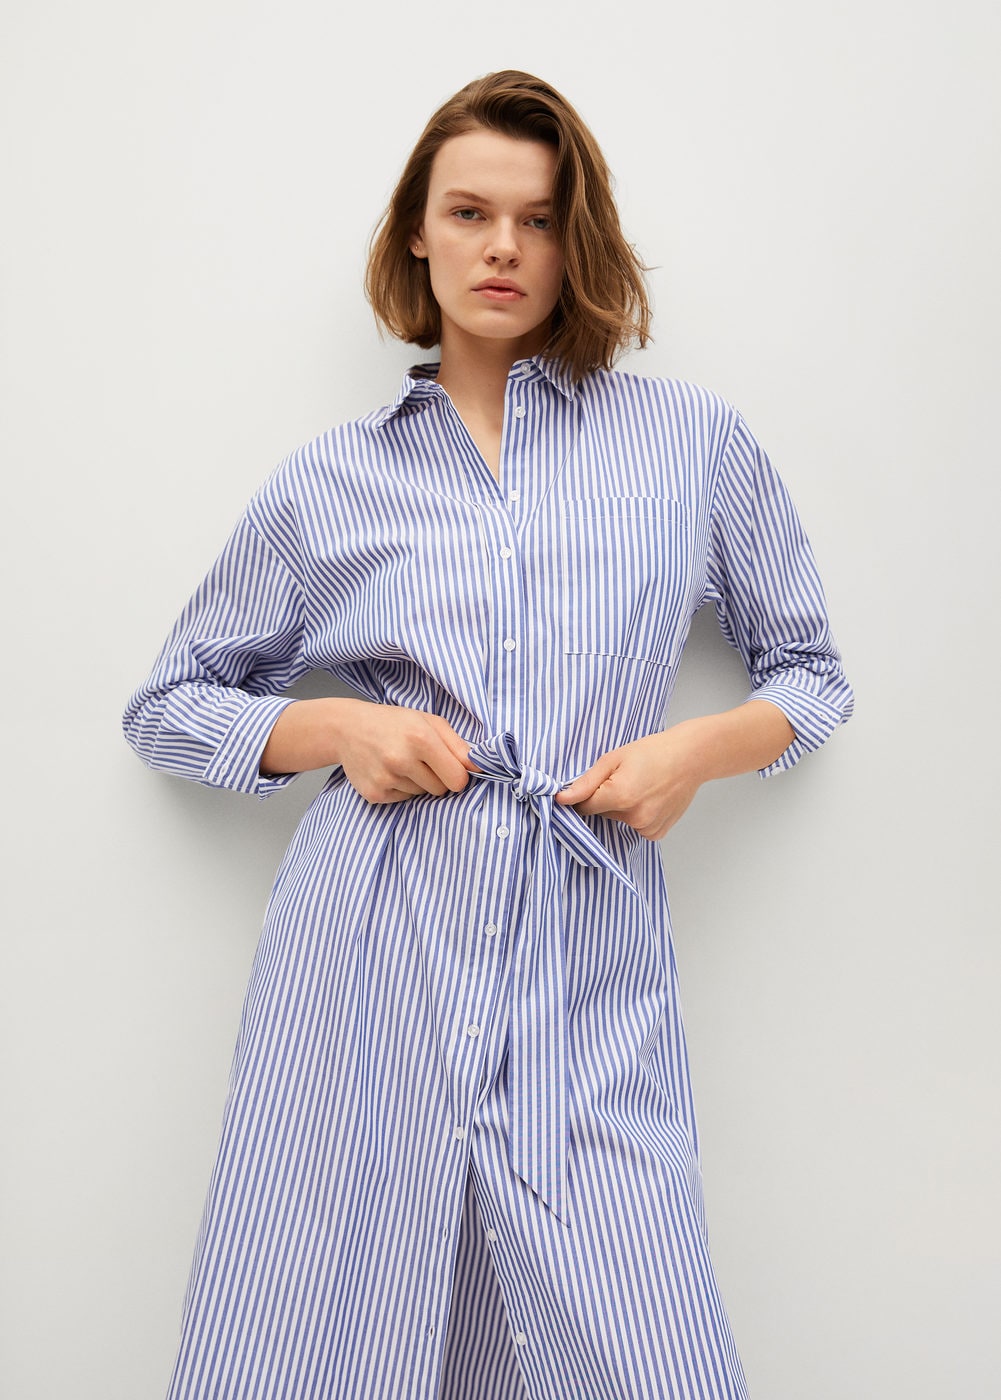 The 25 Best Shirt Dresses to Buy Now | Who What Wear UK